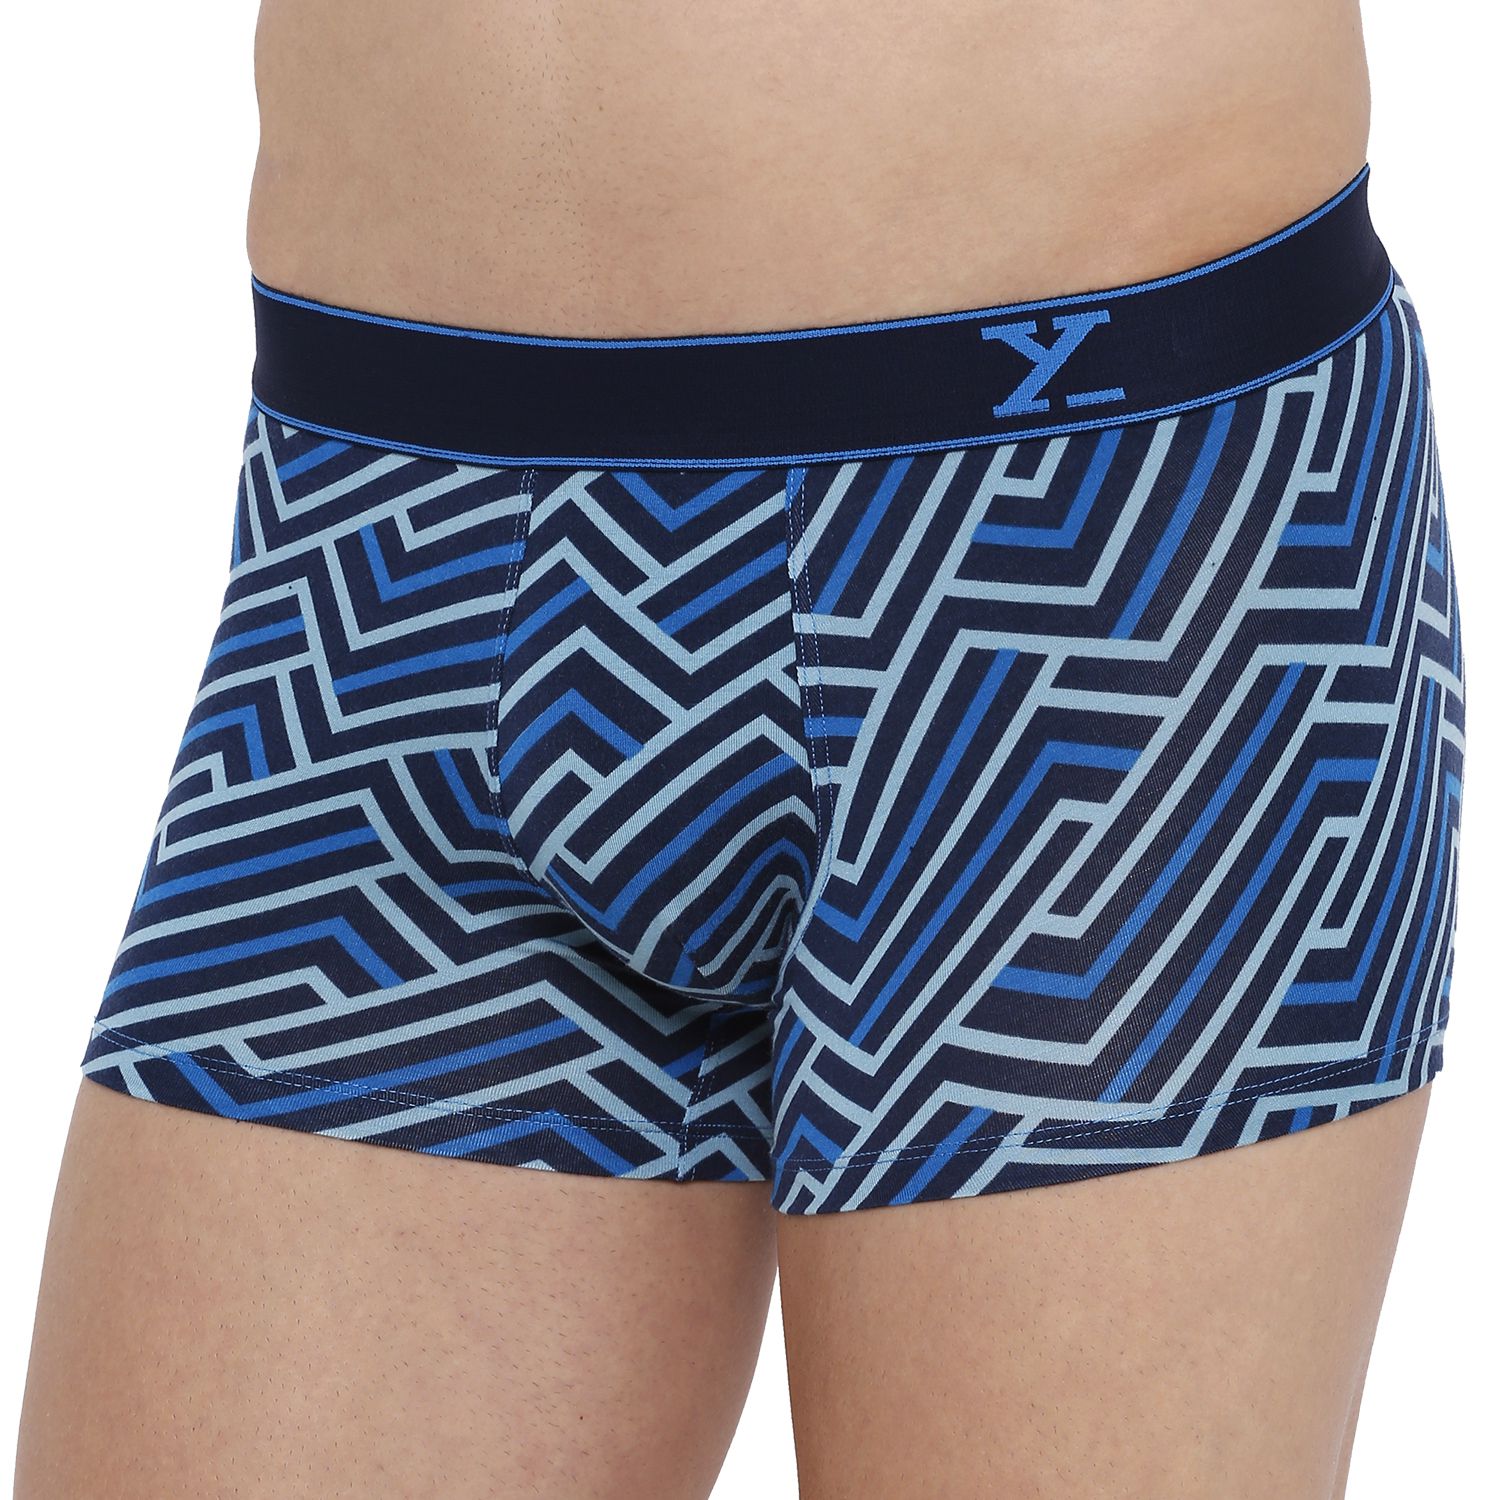 XYXX Blue Trunk Single - Buy XYXX Blue Trunk Single Online at Low Price ...